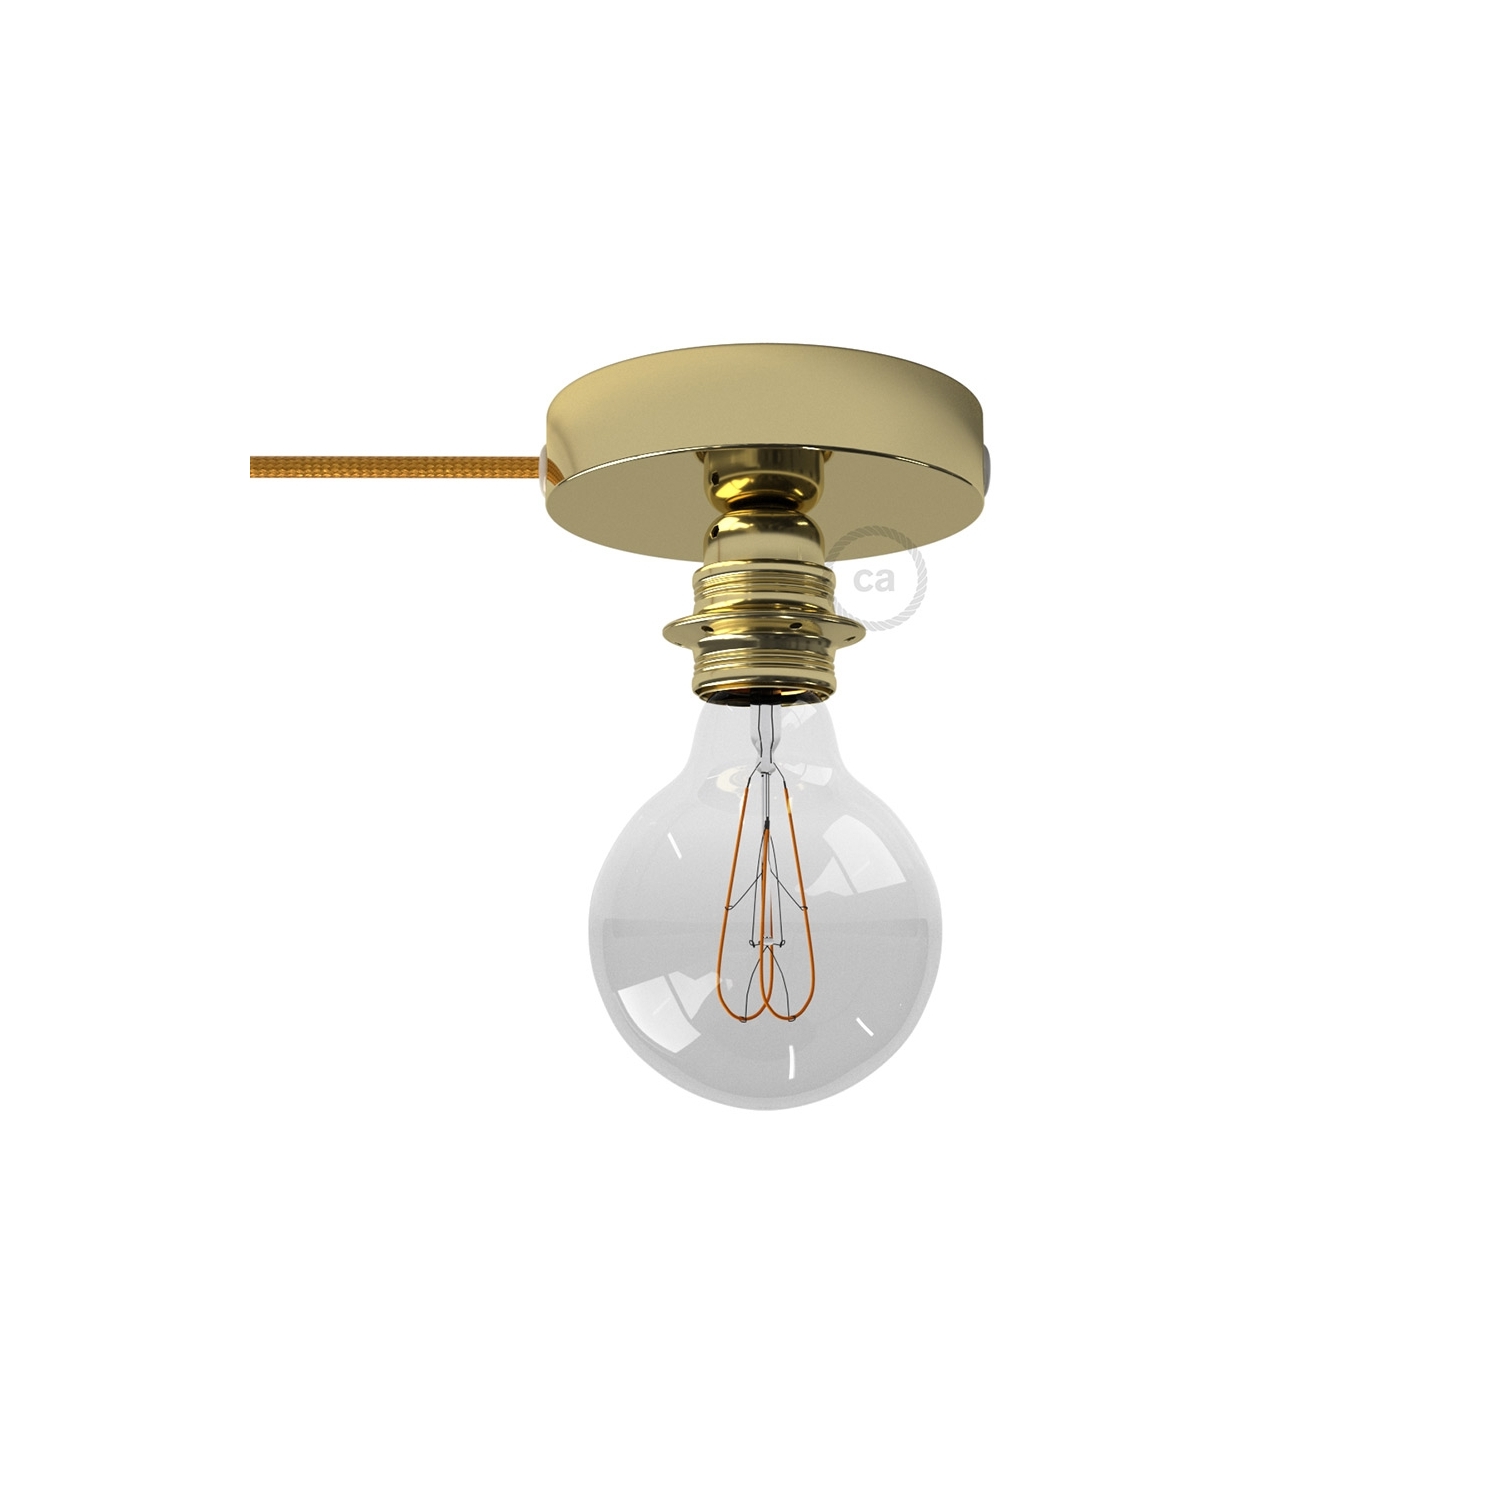 Spostaluce, the brass metal light source with E26 threaded socket, fabric cable and side holes